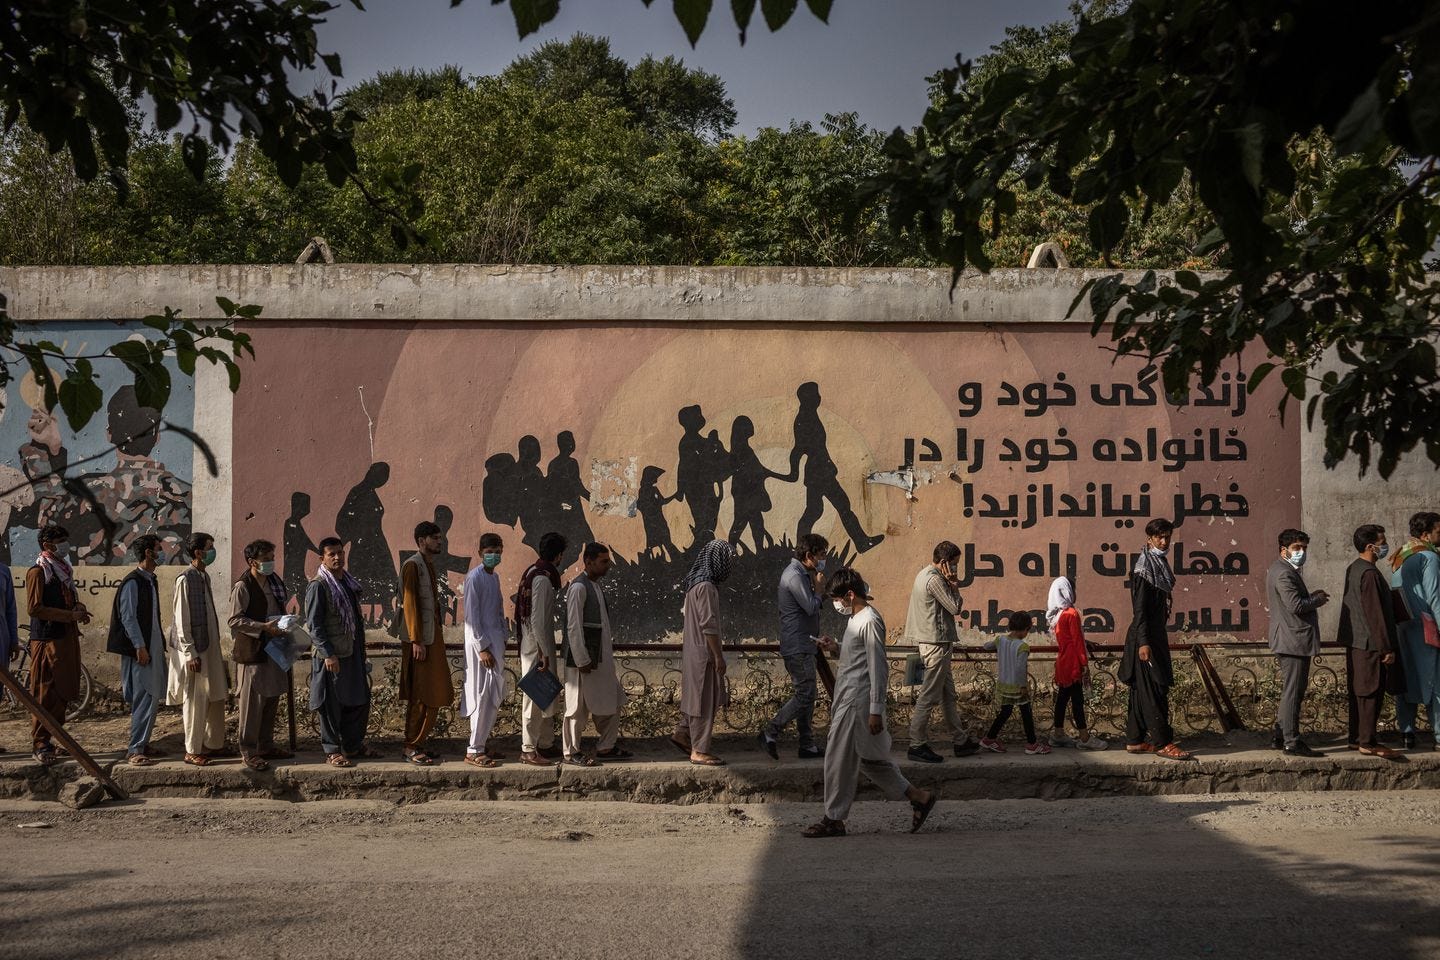 Afghans waited in line for the Kabul passport department, in front of a mural warning against migration, in July.